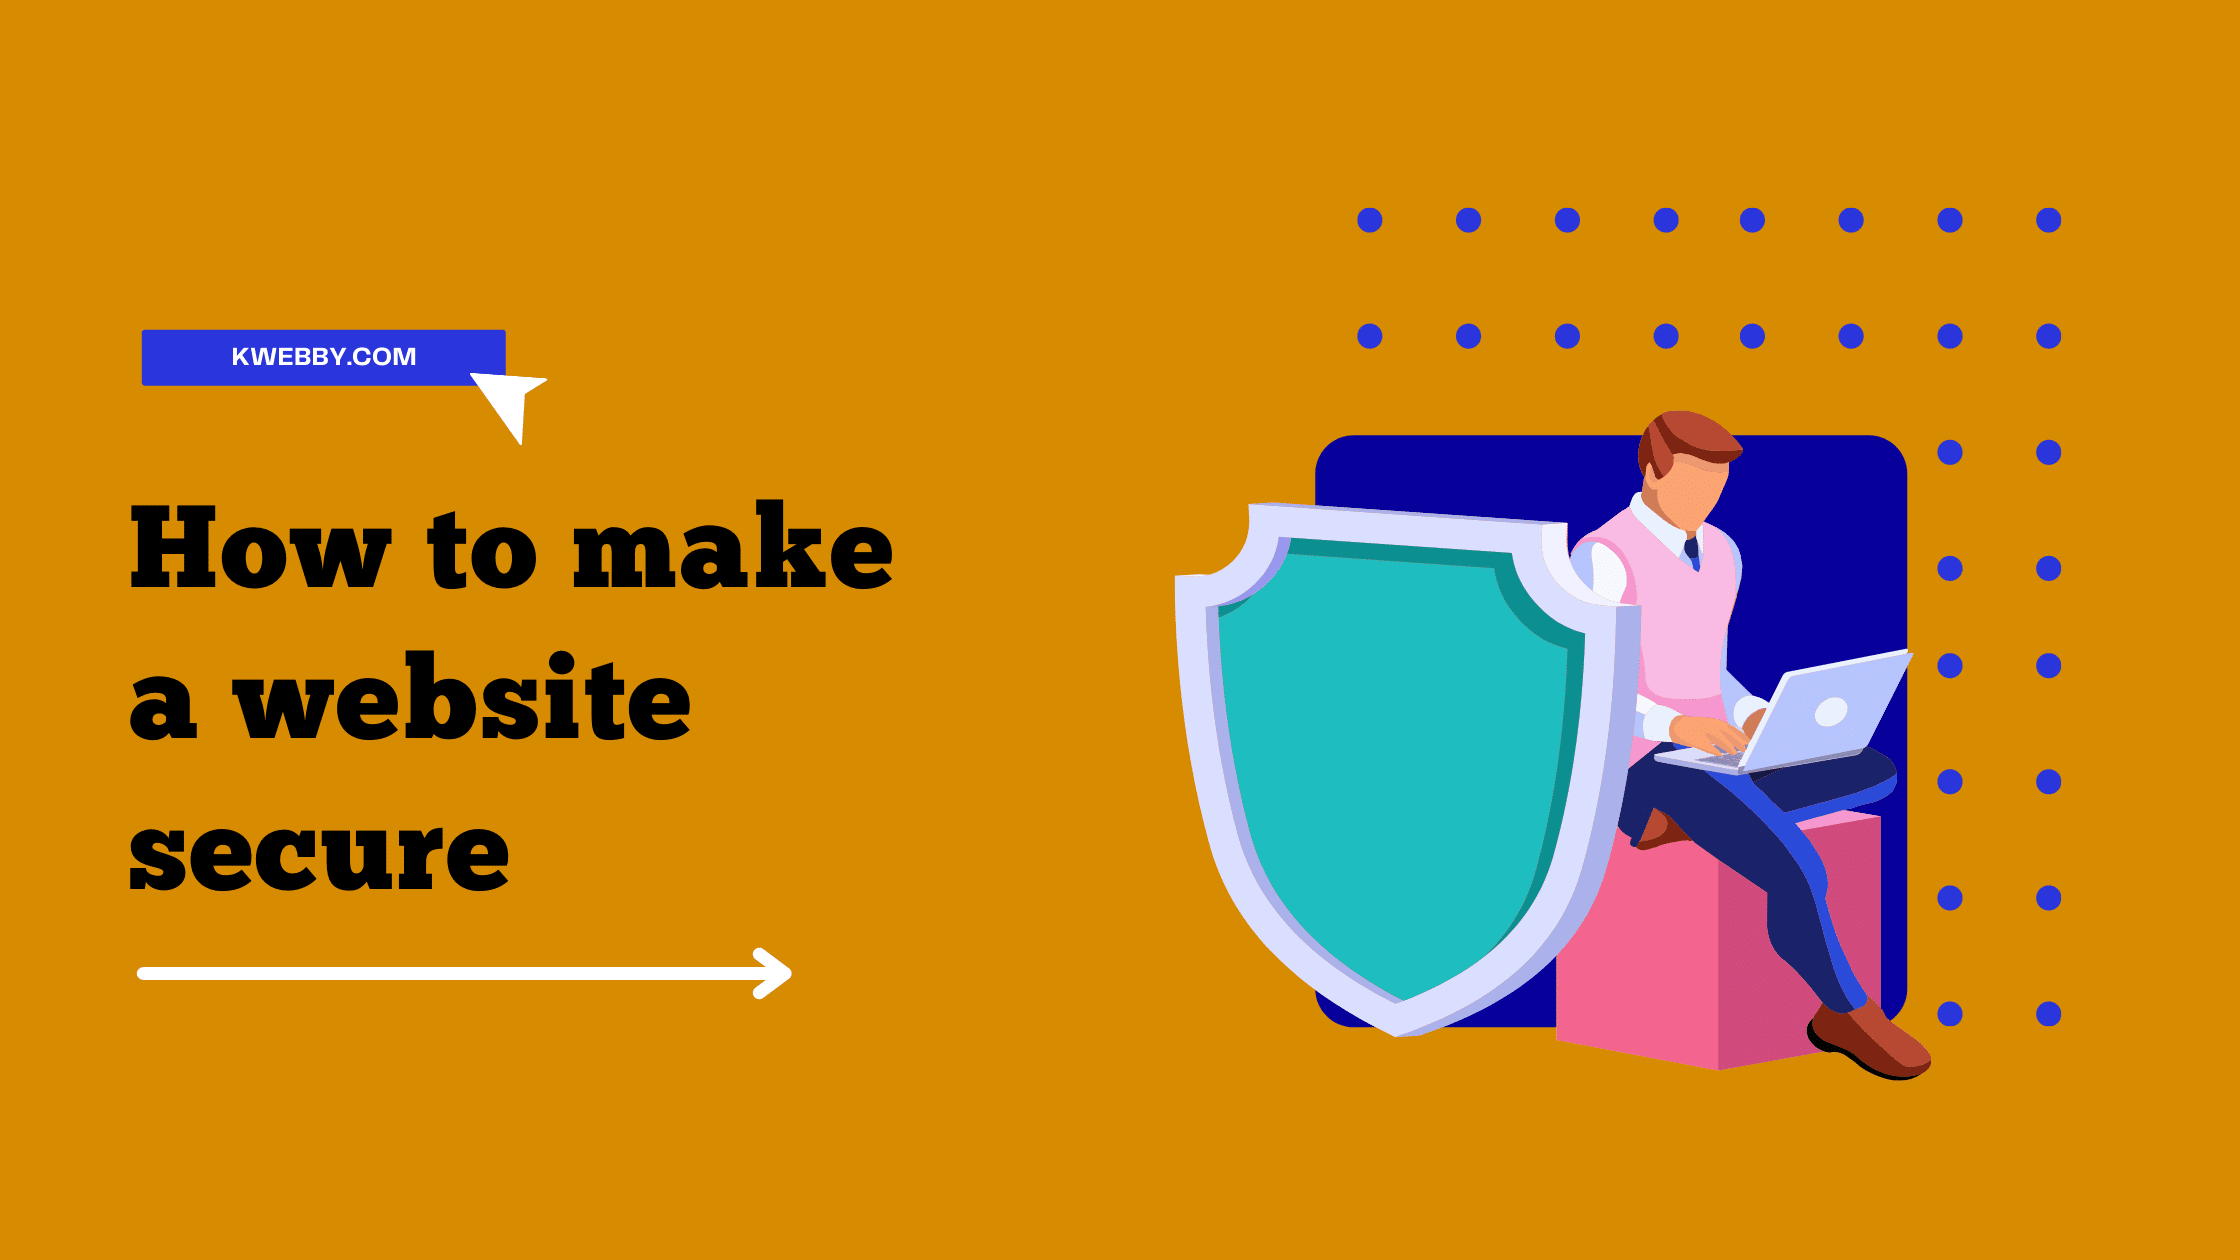 How to make a website secure